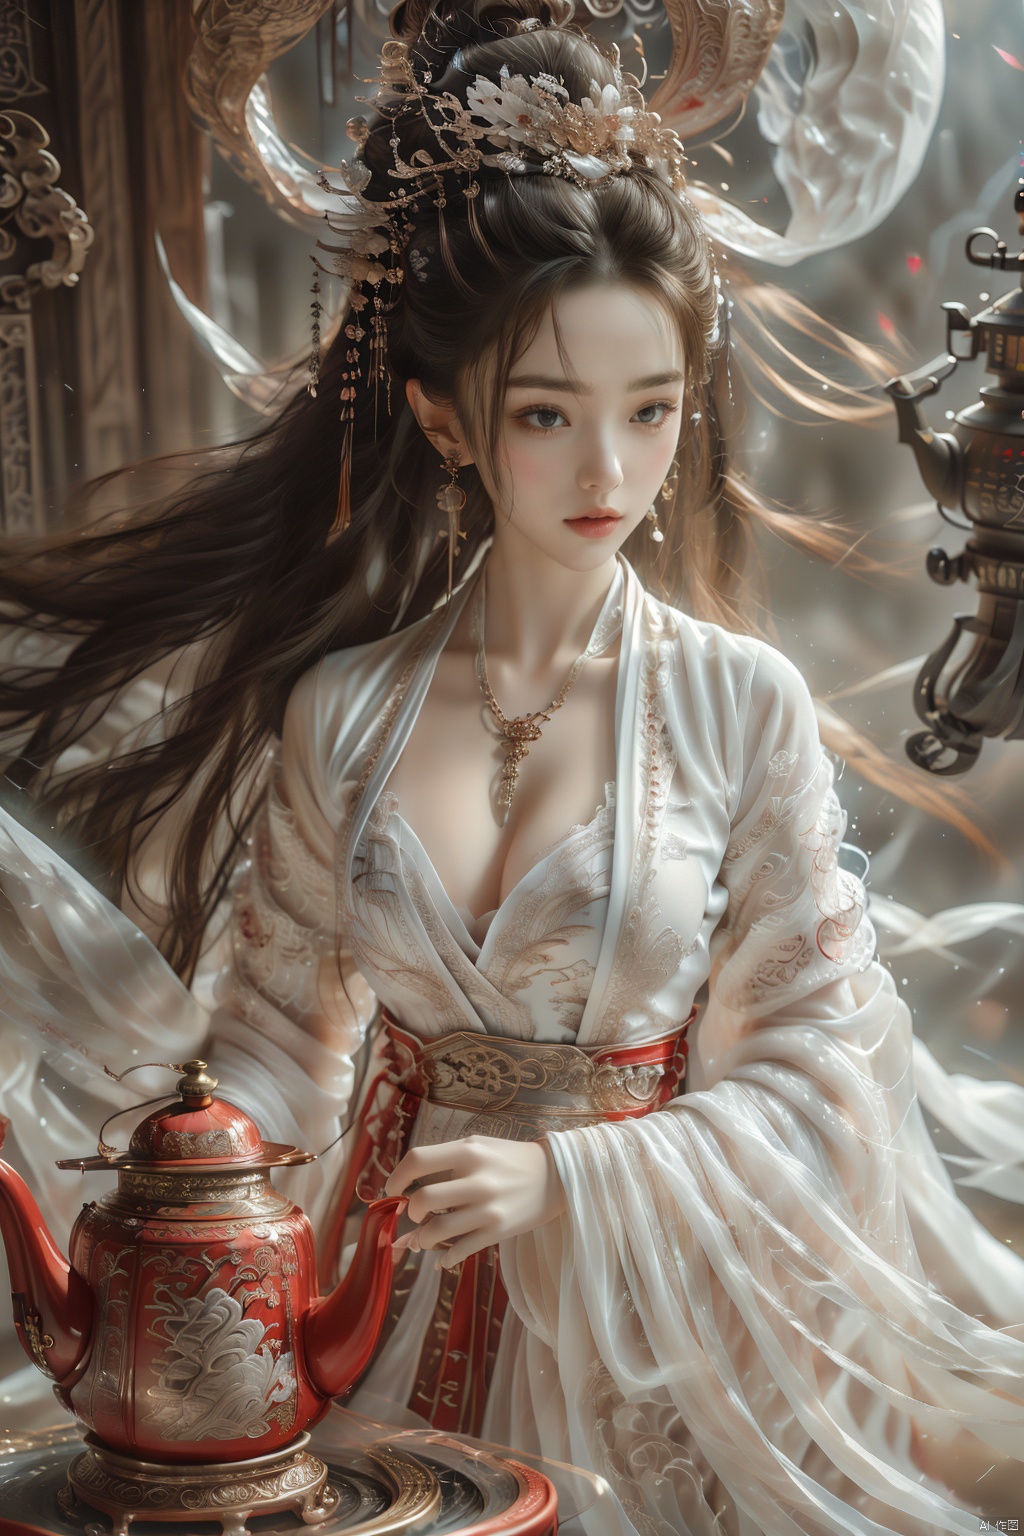  1 girl, long black hair, big chest, Chinese dress, cleavage, cup, clothes, earrings, hair decoration, Hanfu, interior, jewelry, canteen, lamp, lantern, lips, realistic, transparent, solo, ancient table, screen, teapot, wide sleeve, full moon, night, lying down, wunv